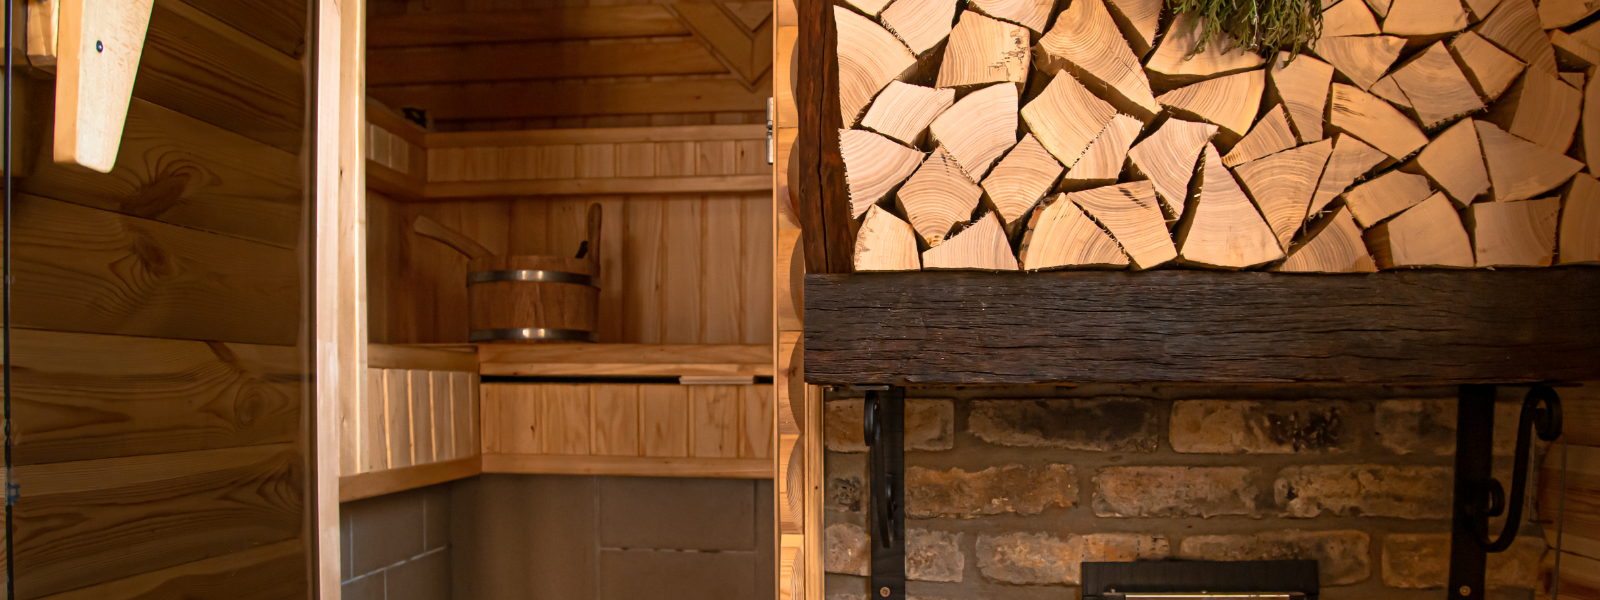 MONTERRE OÜ - We craft bespoke saunas, erect wooden structures, and create durable solid wood furniture.